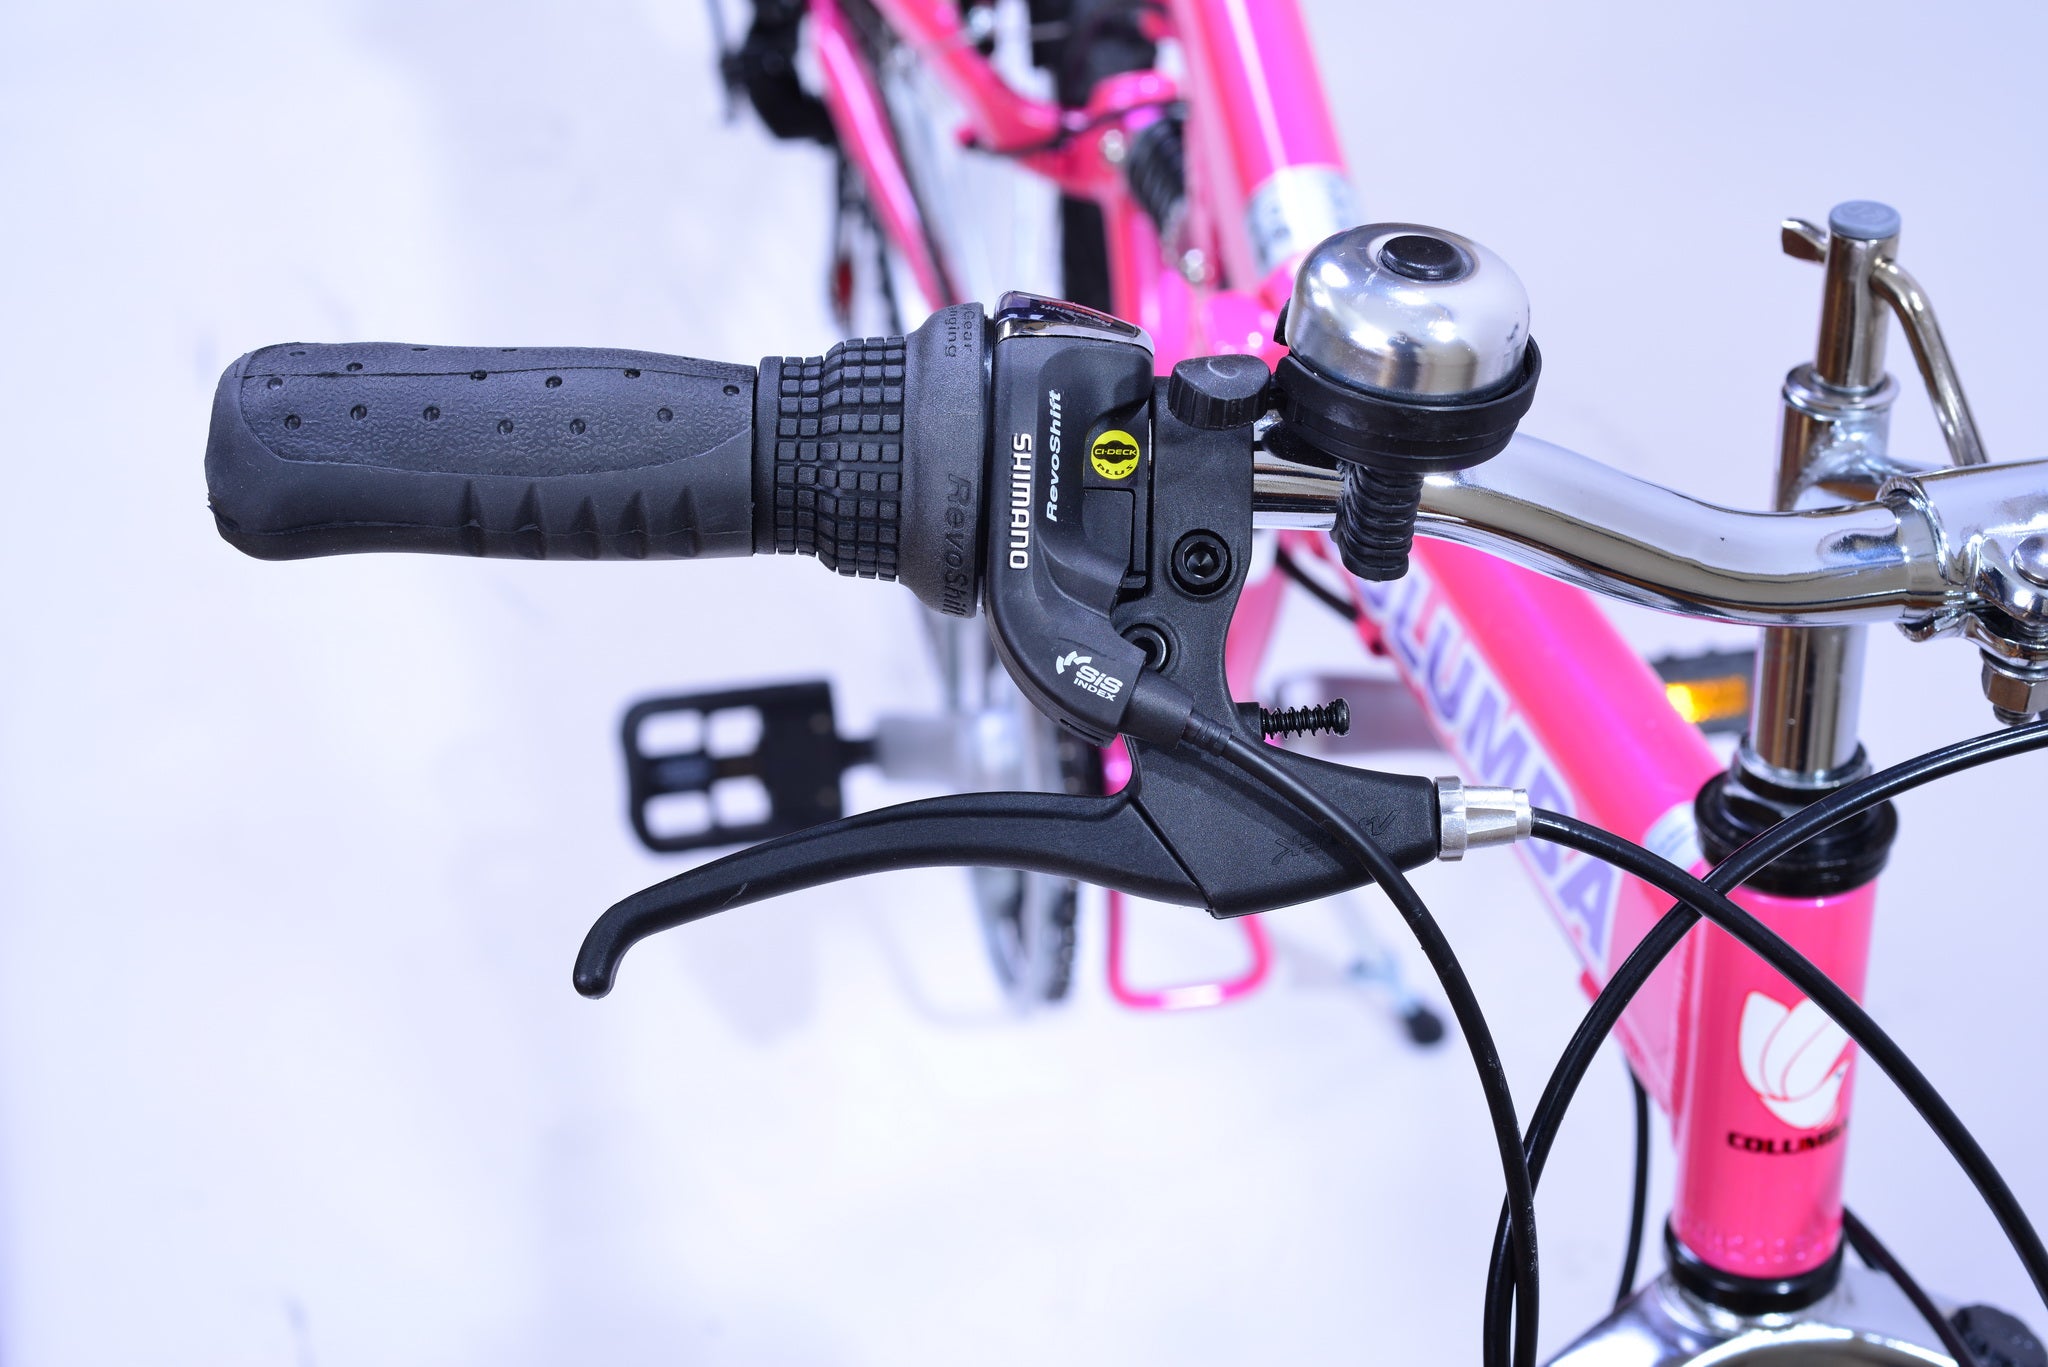 The right handlebar of a bright and vibrant pink bicycle with a bell and brake.